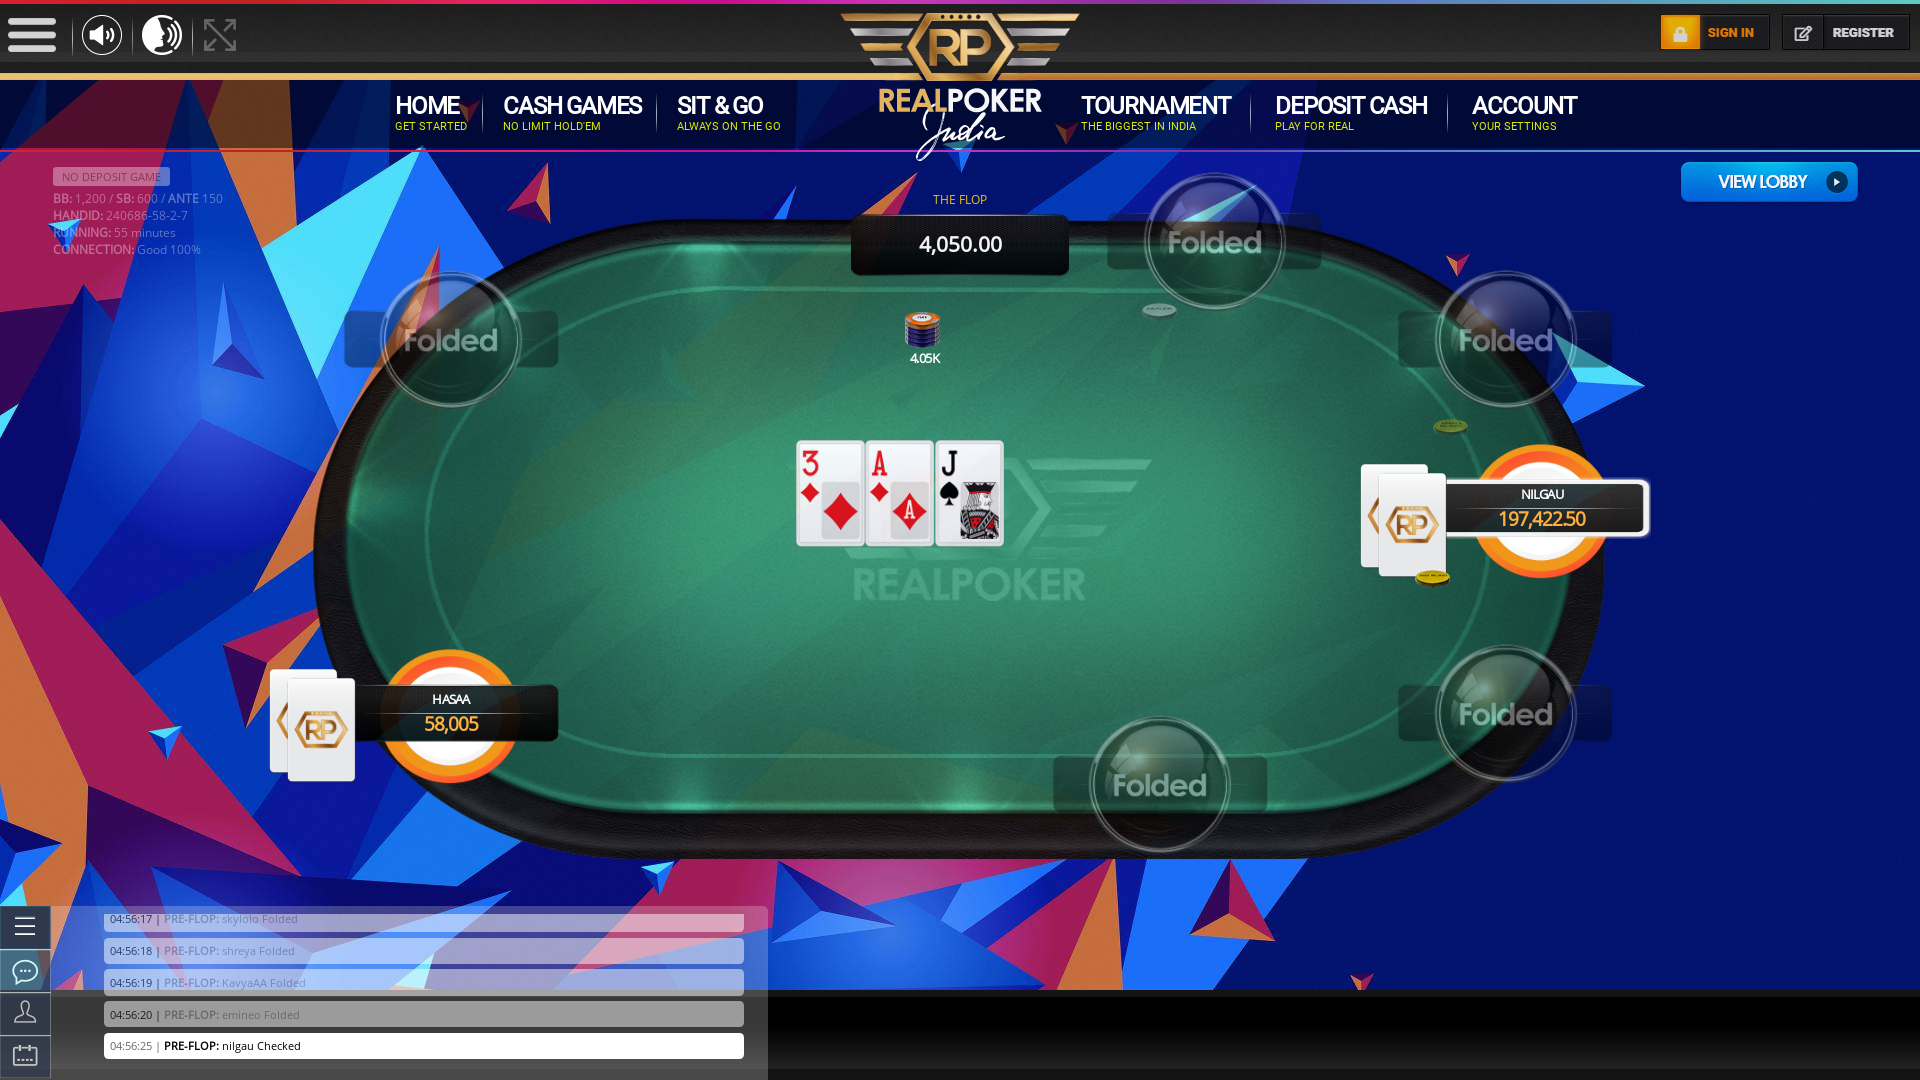 Real poker 10 player table in the 55th minute of the match